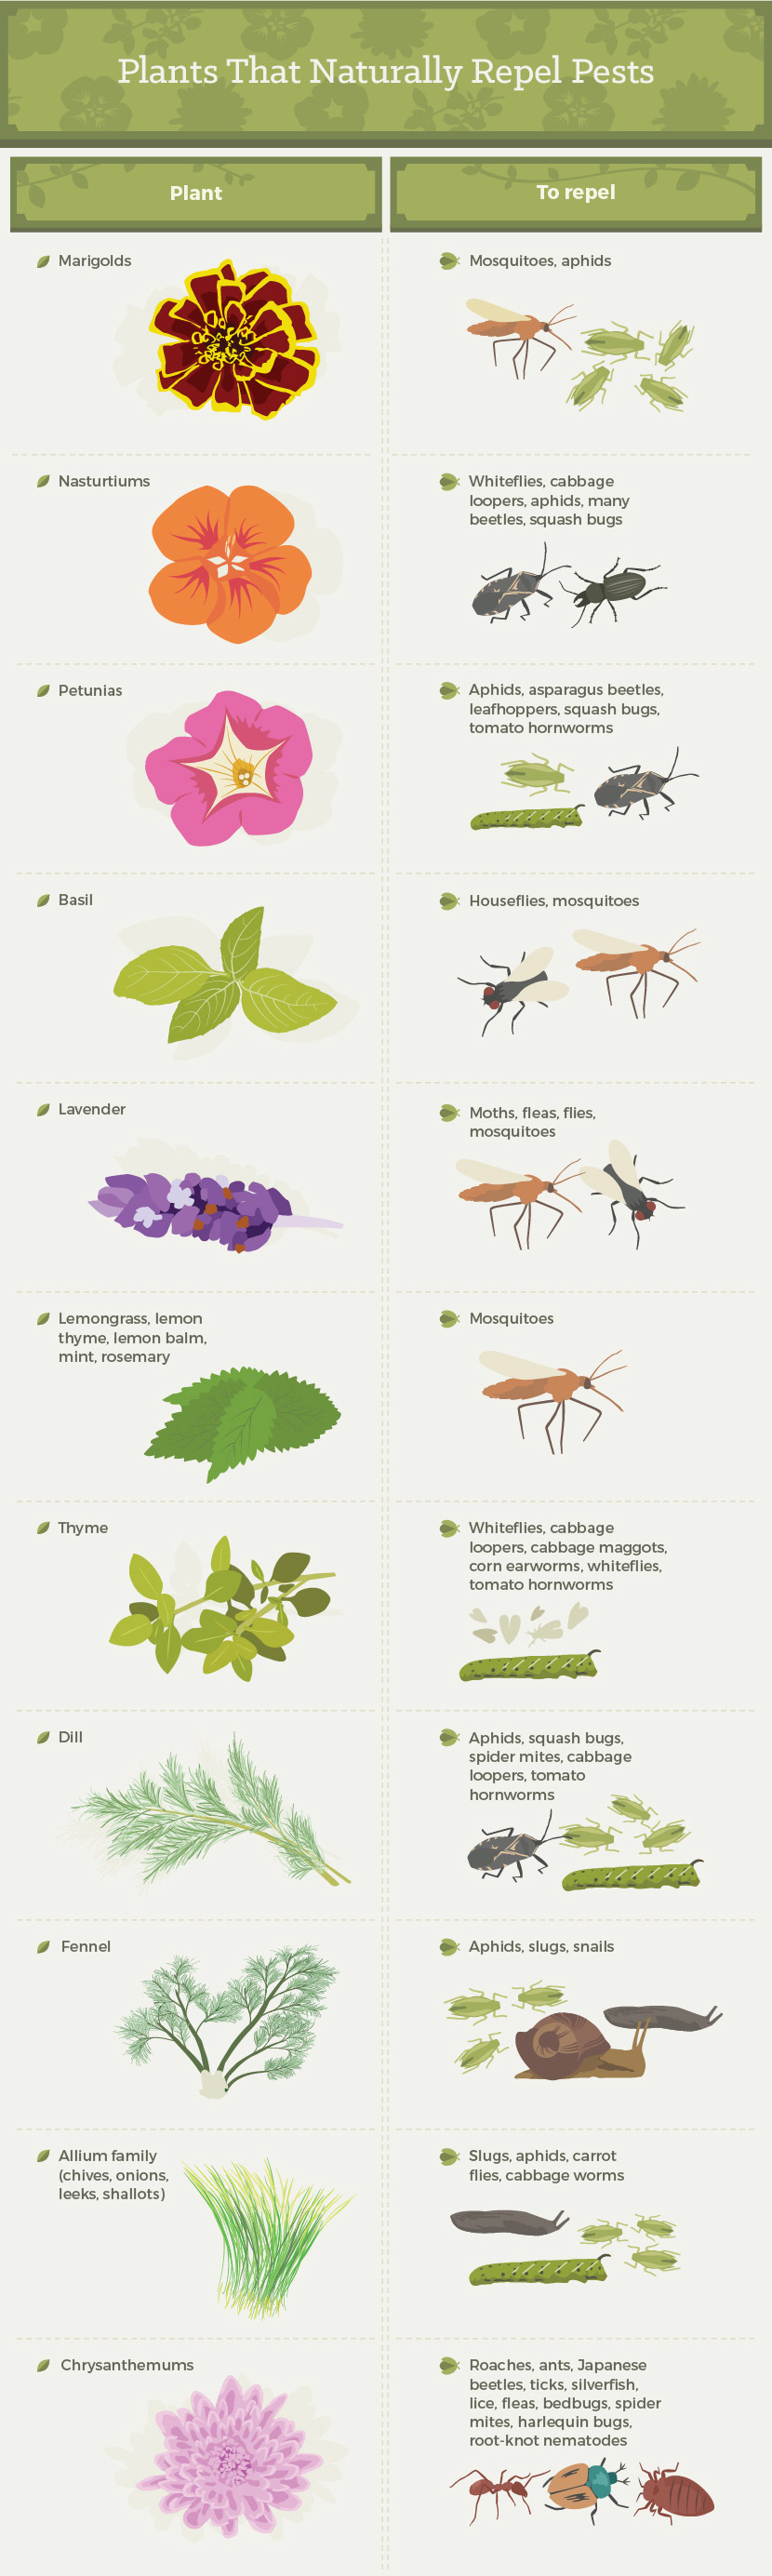 Plants that Naturally Repel Pests